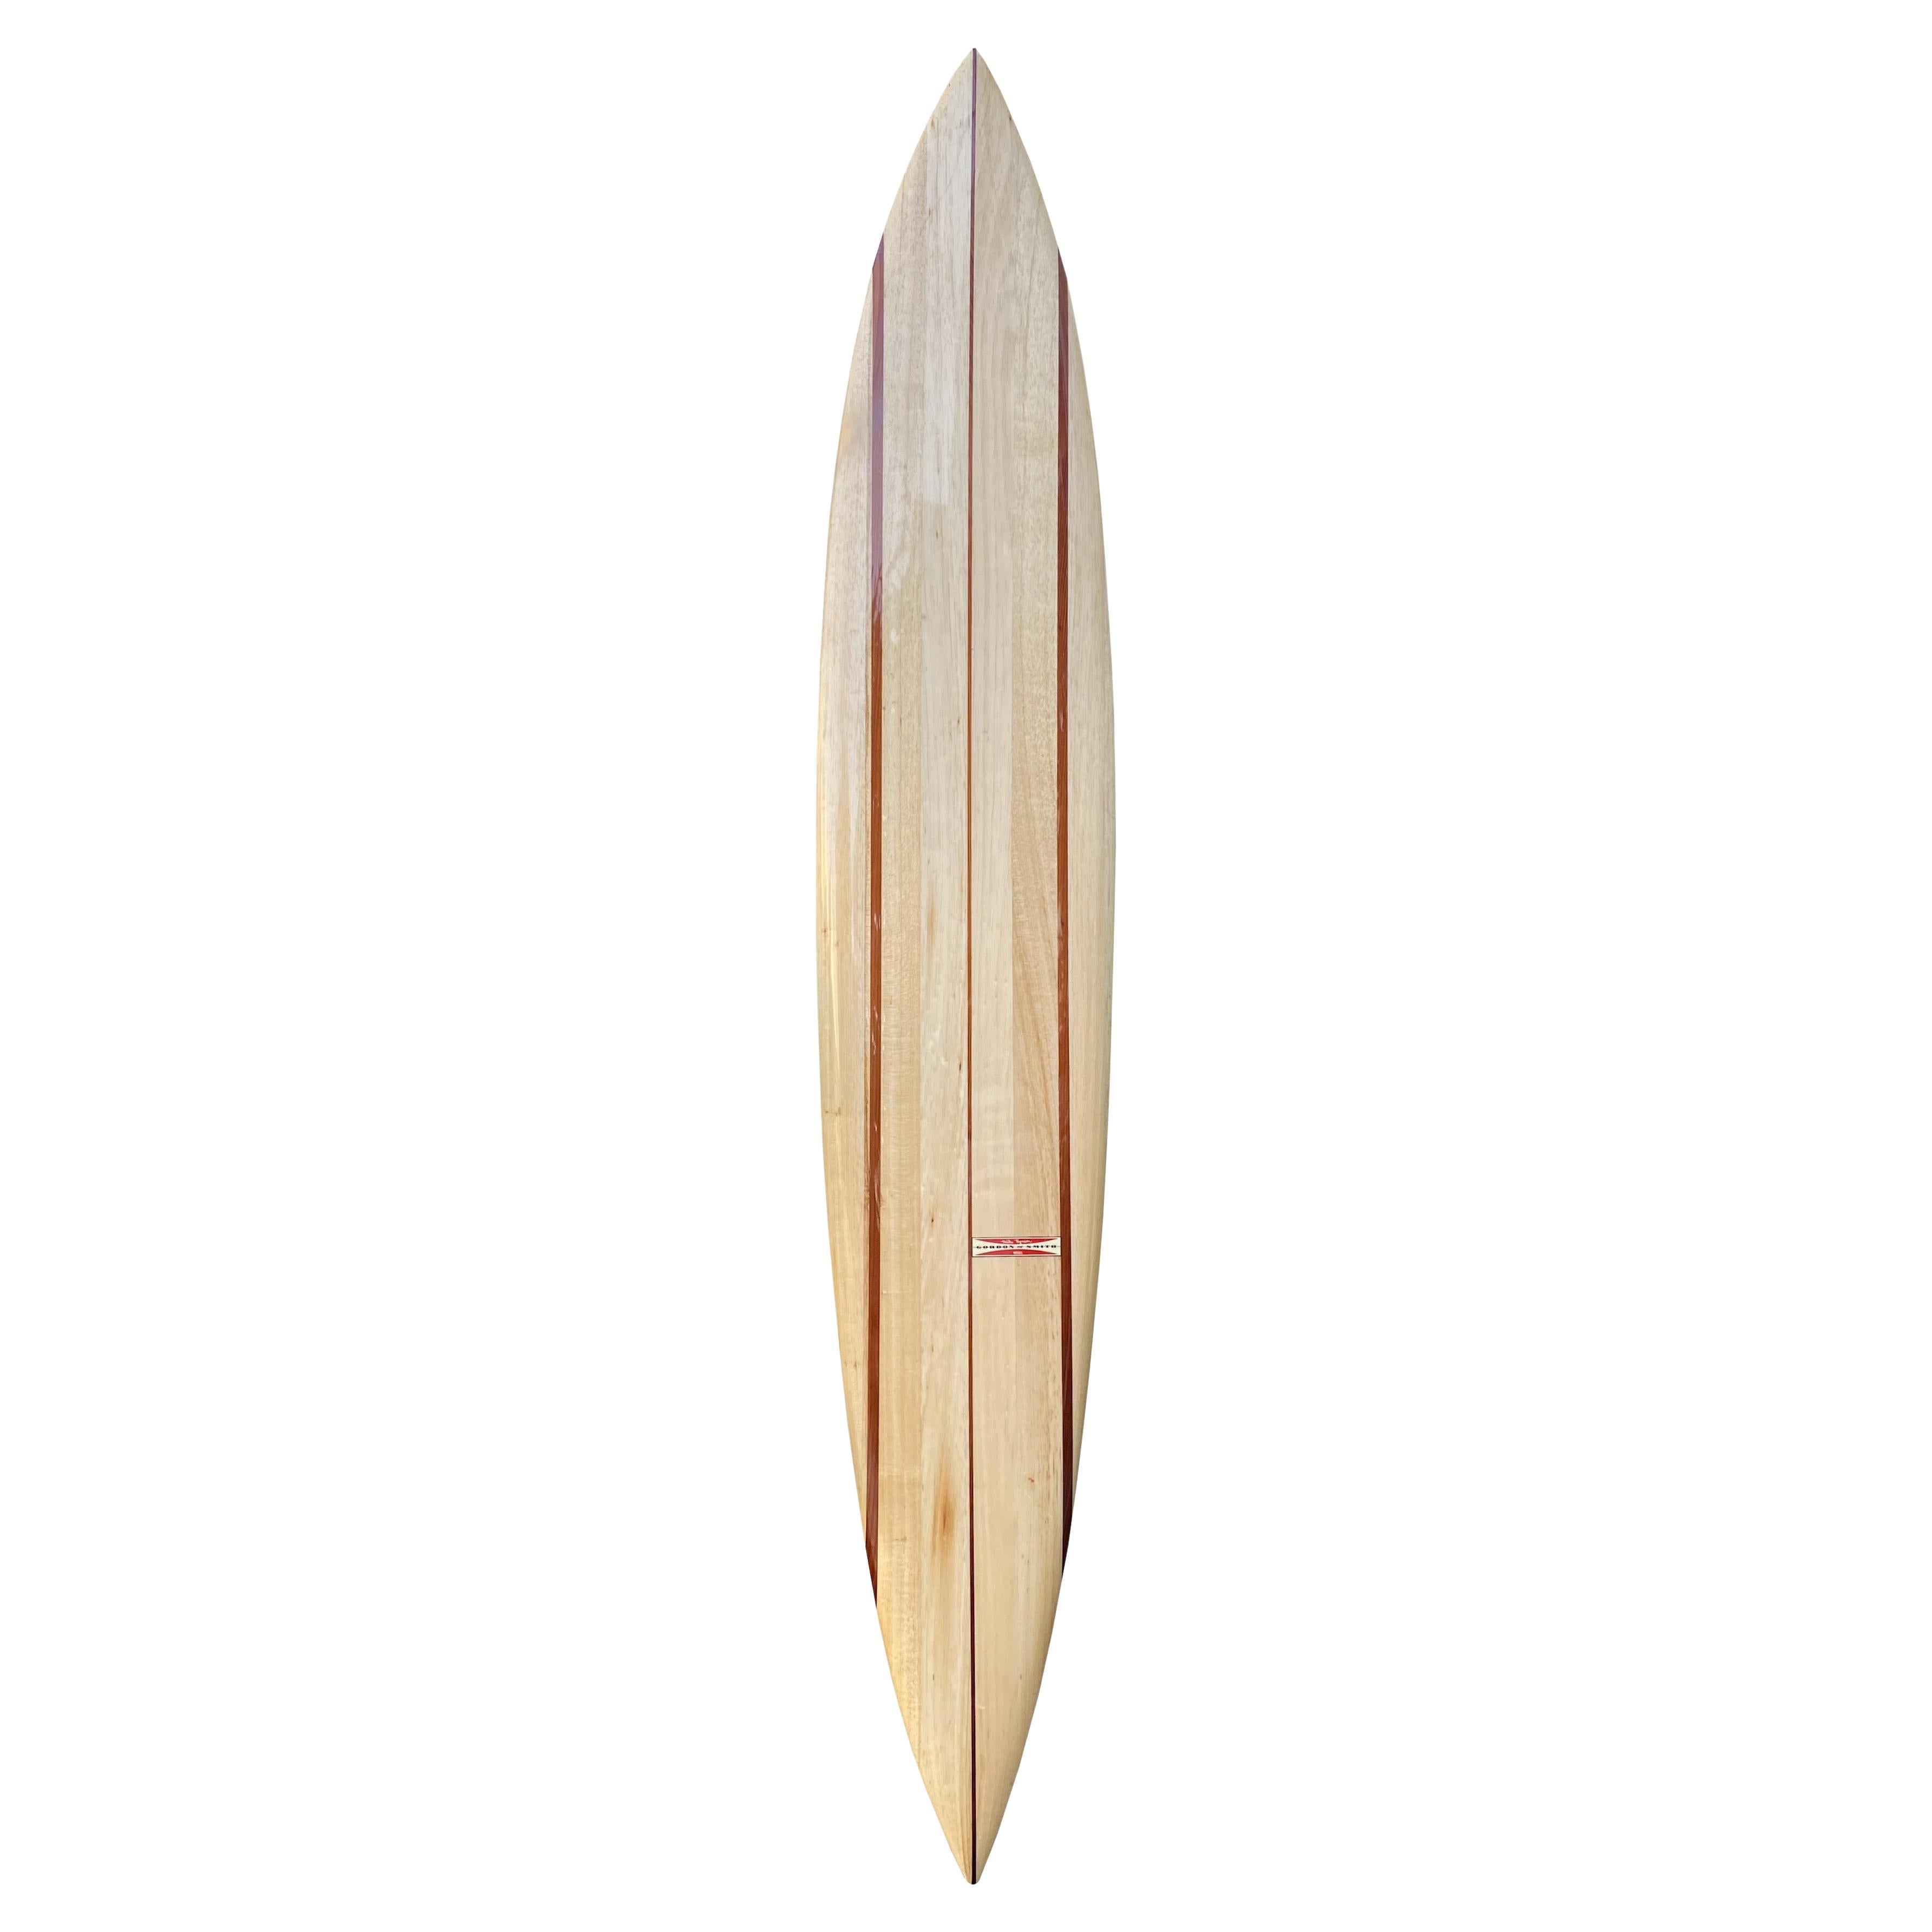 Gordon and Smith Balsawood Big Wave Surfboard by Mike Hynson at